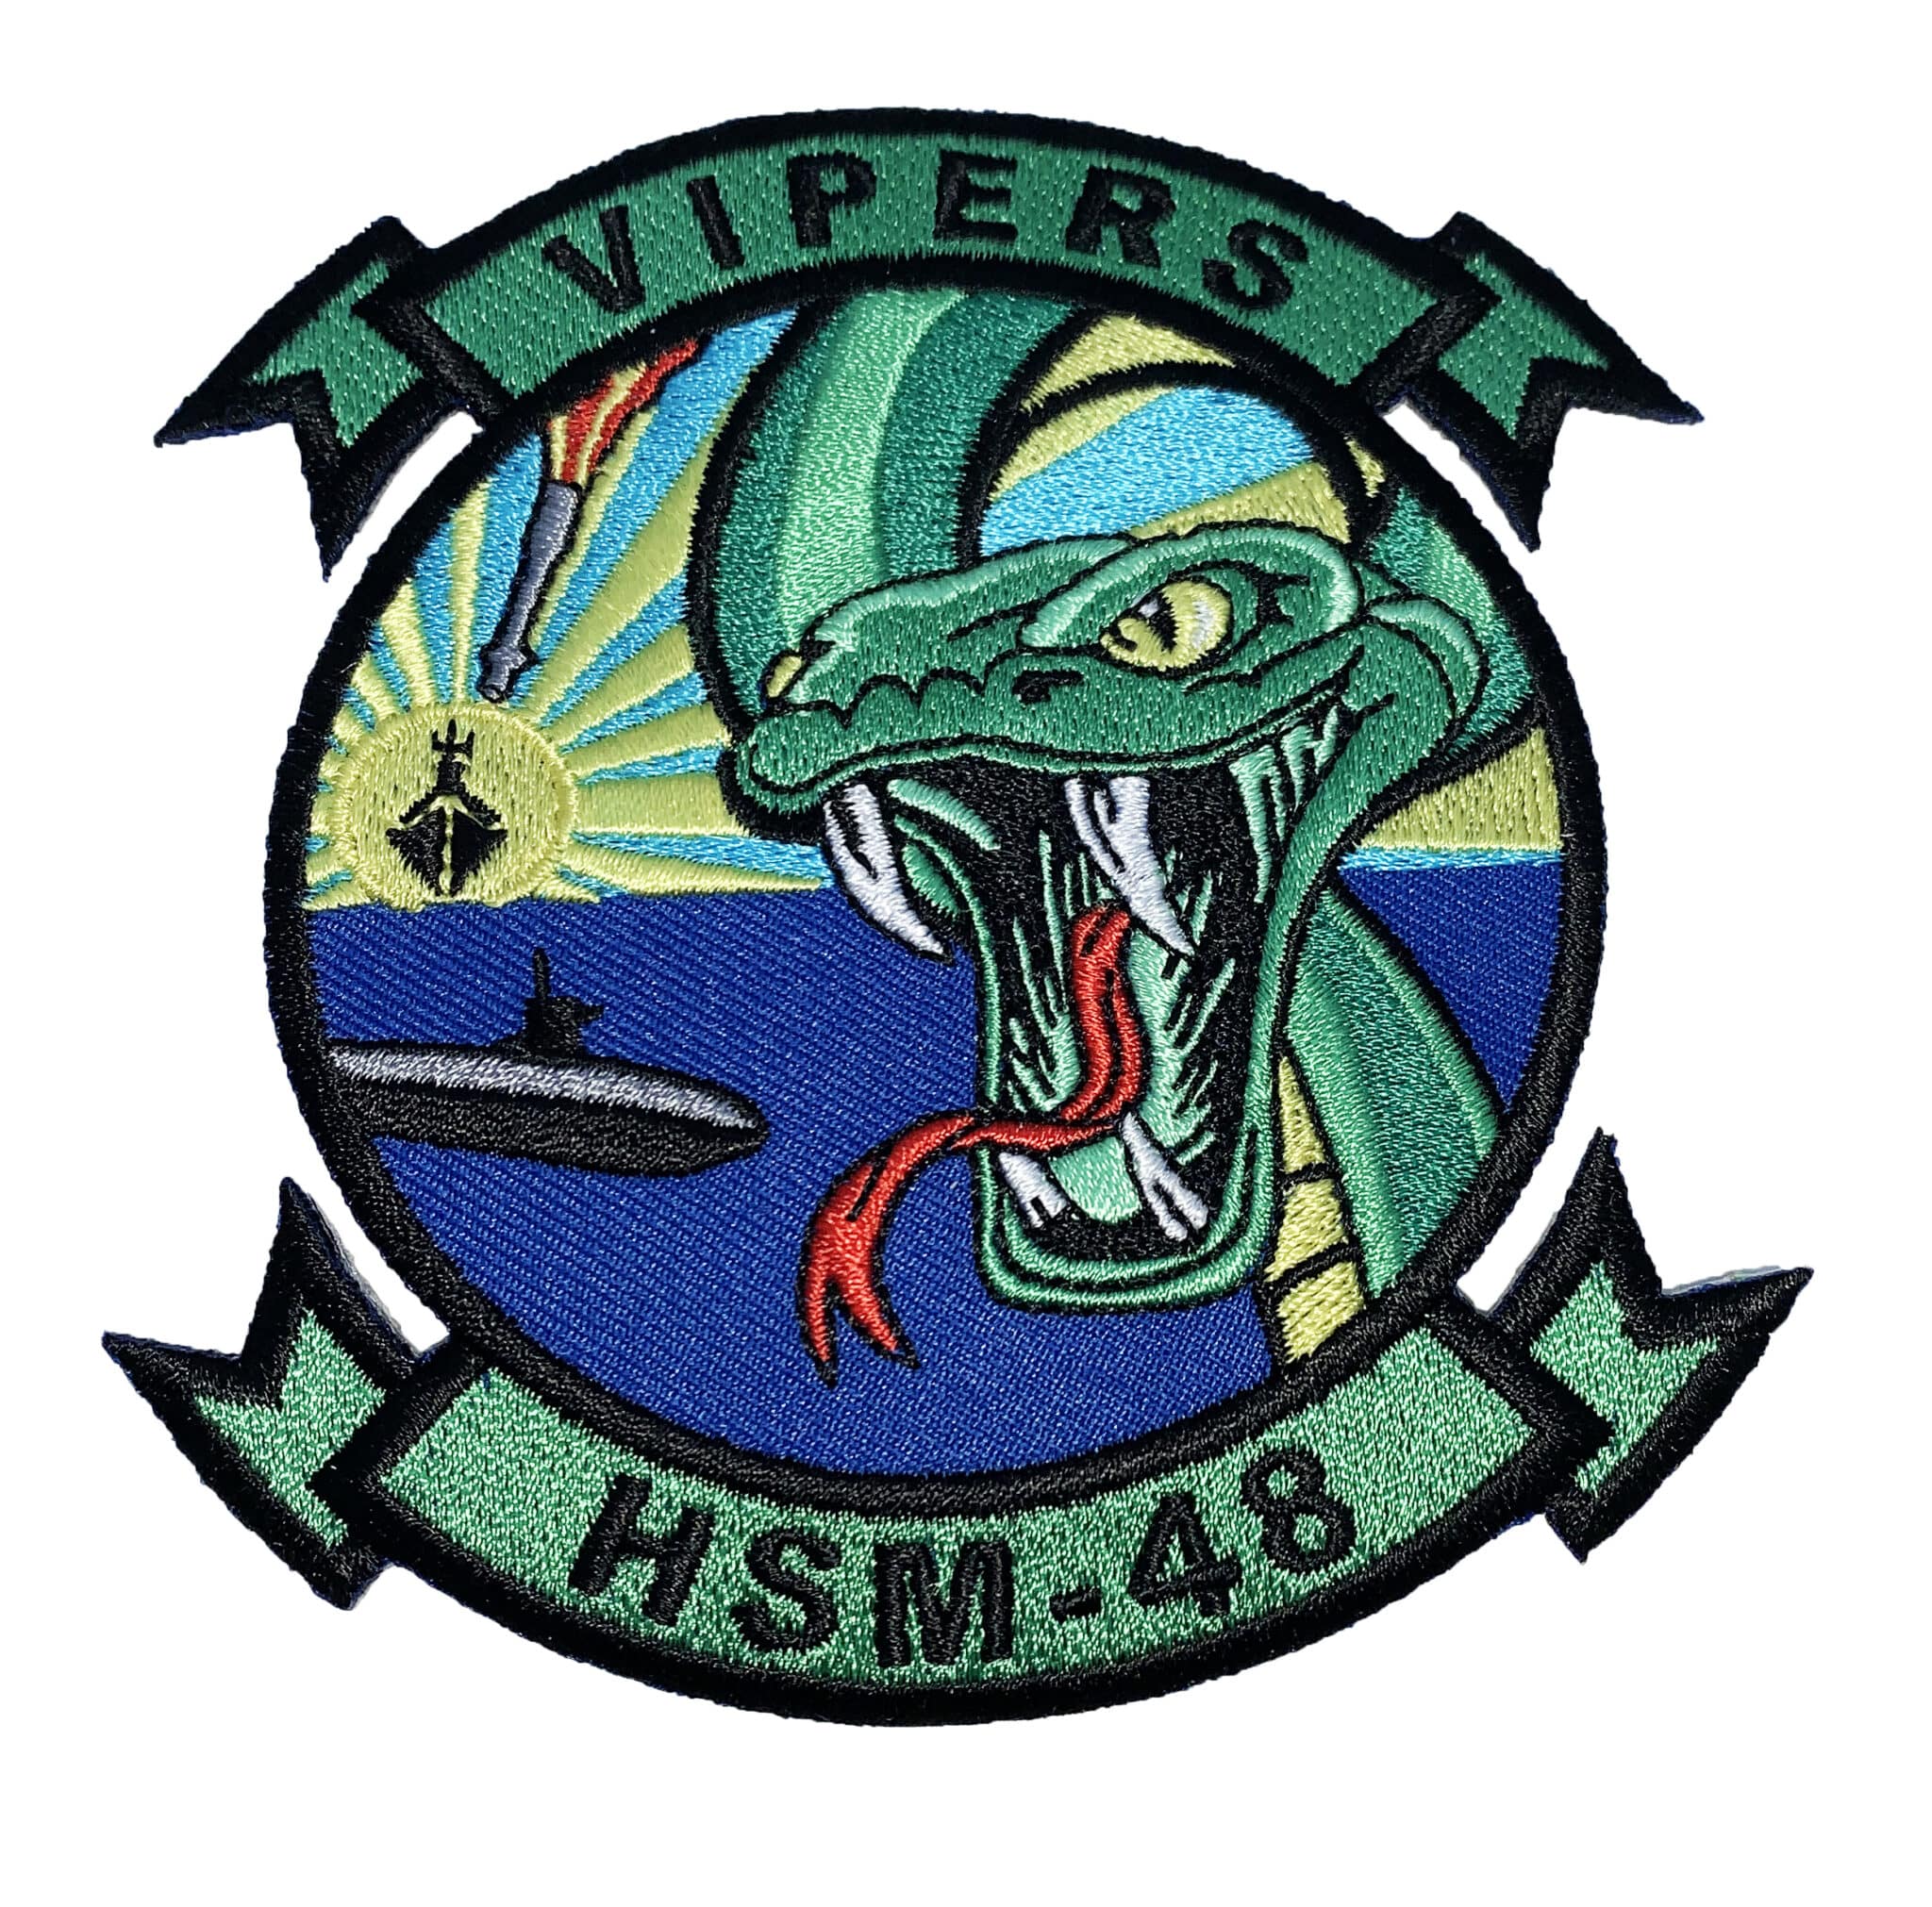 HSM-48 Vipers Patch – Plastic Backing